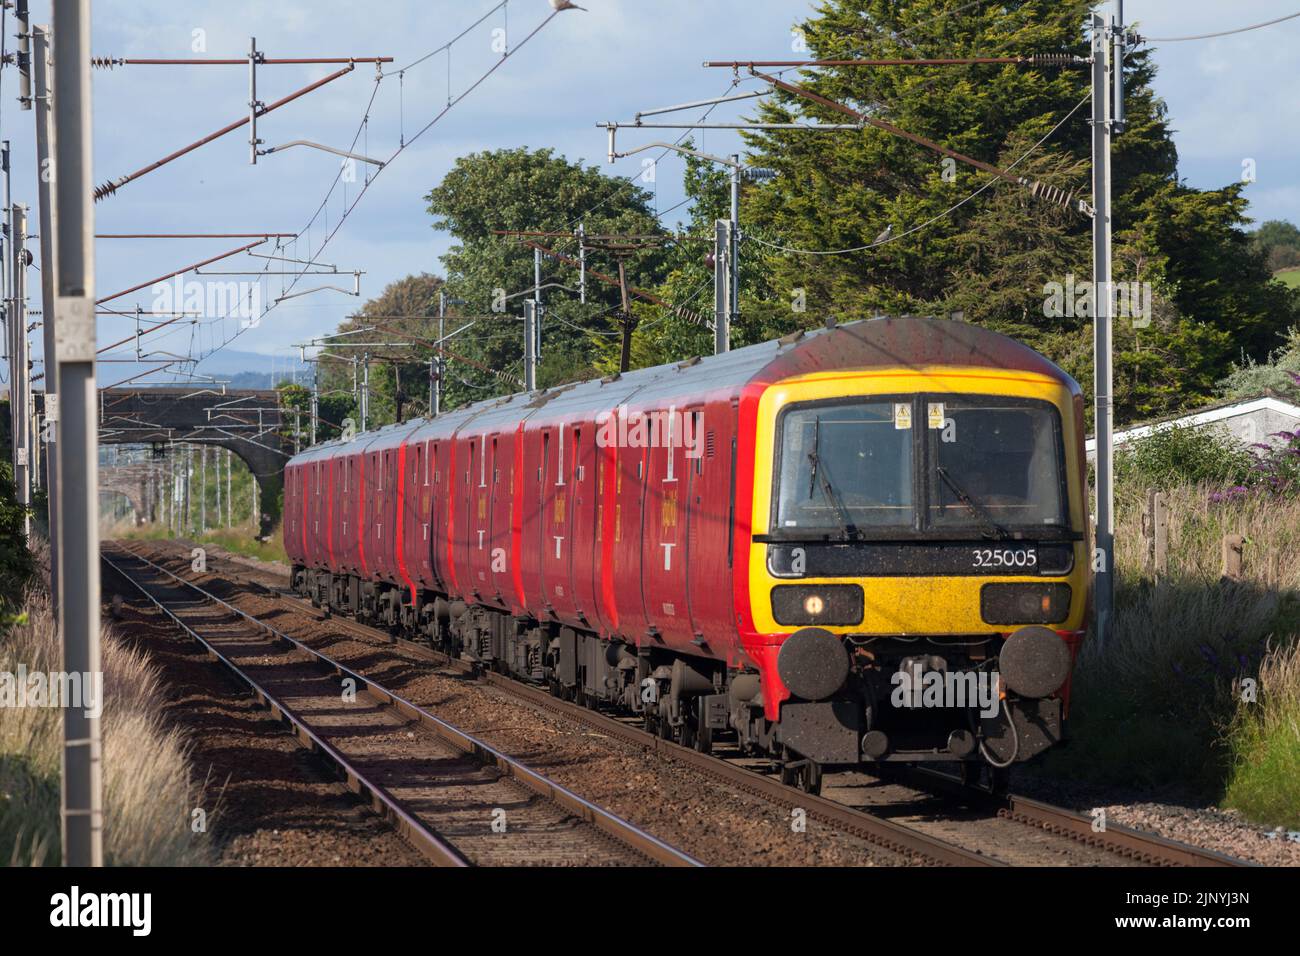 Royal Mail class 325 freight multiple units on the west coast mainline lancashireCumbria with Shieldmuir to Warrington working Stock Photo